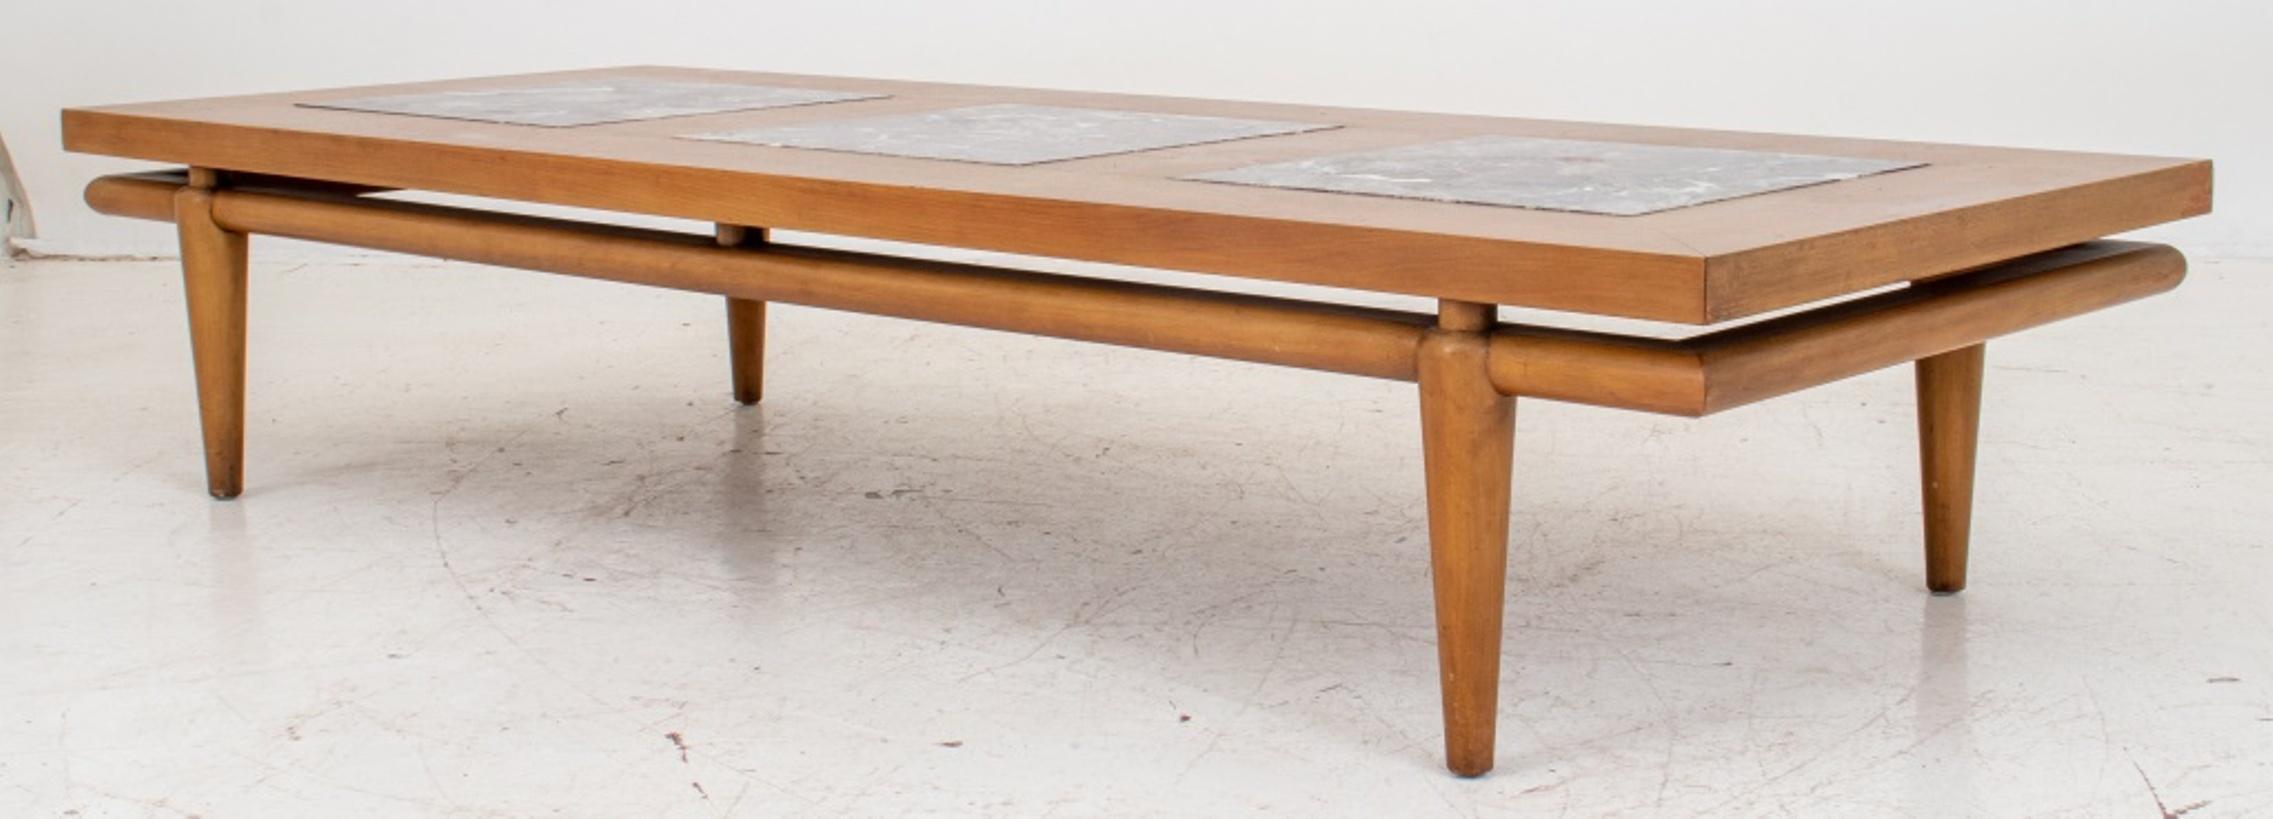 Large John Widdicomb low table made of walnut grain with three thick marble inserts, floating top raised on four tapered legs. 14